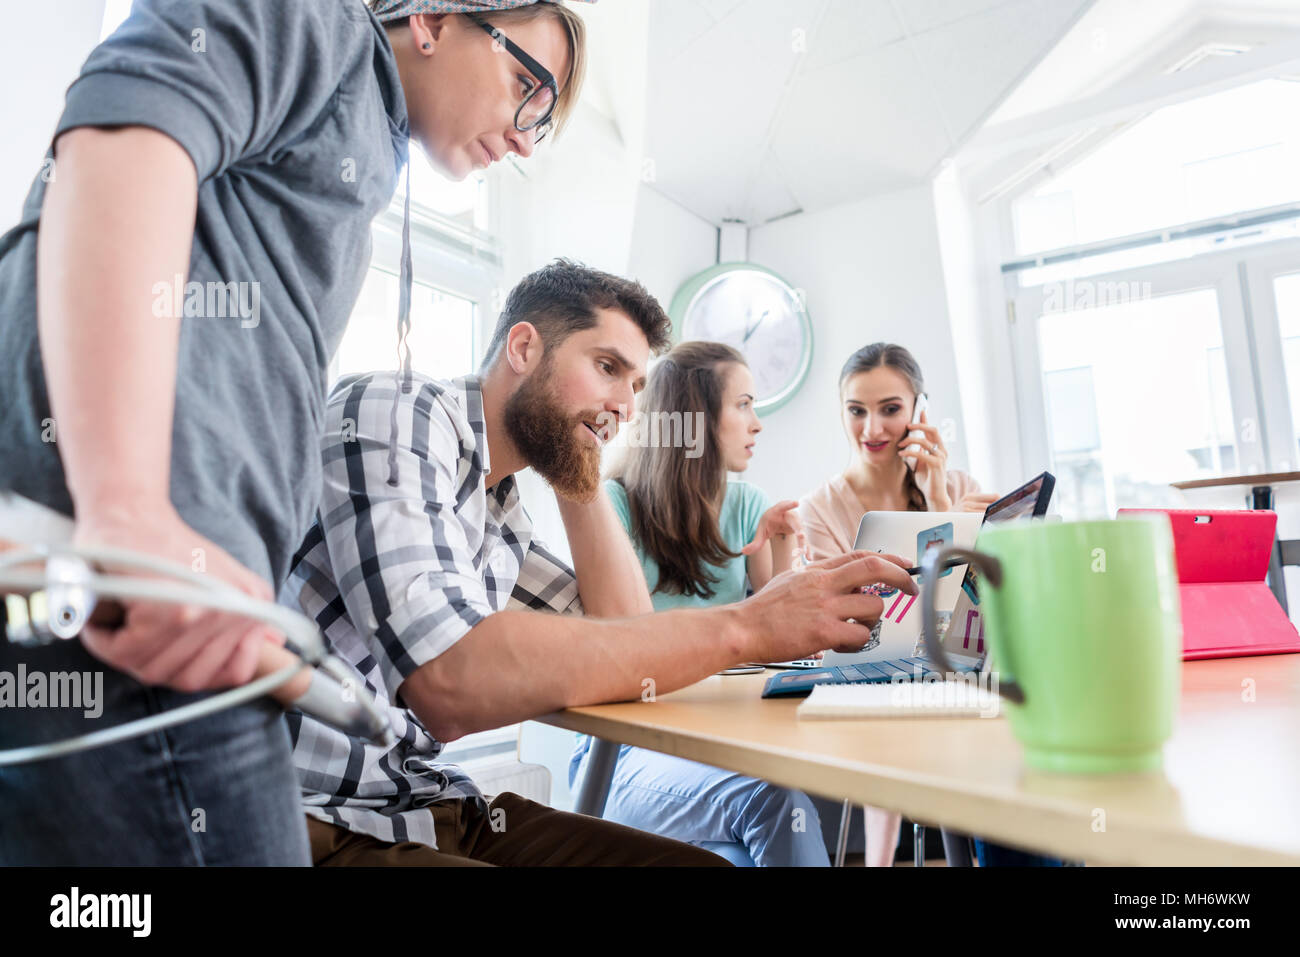 Self-employed young man analyzing a difficult task while working Stock Photo